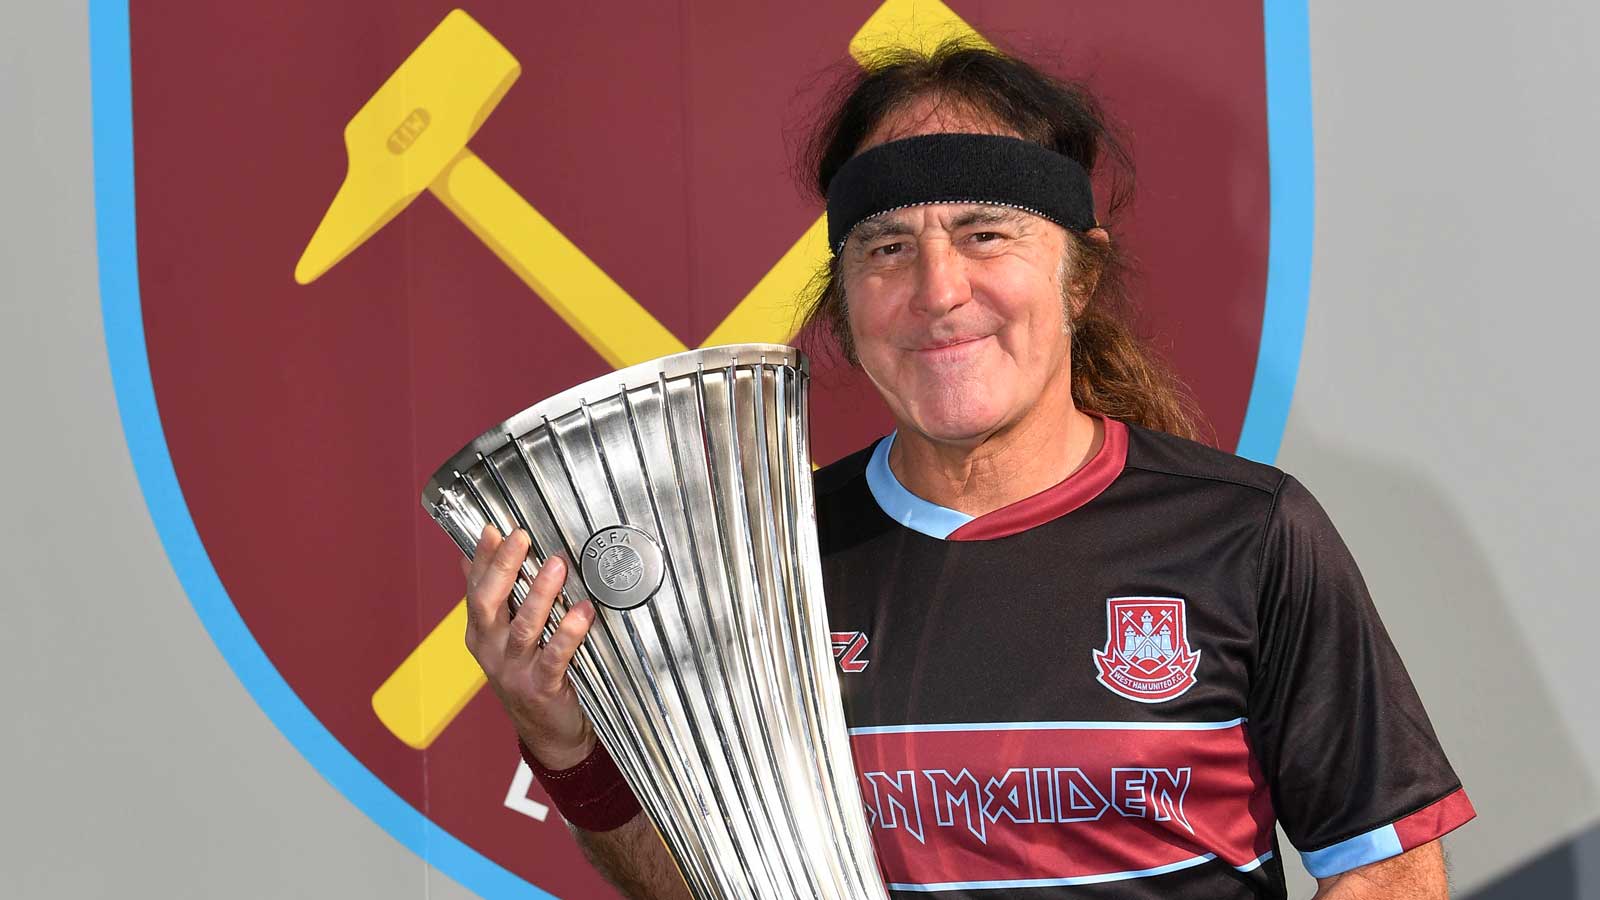 Iron Maiden's Steve Harris with the UEFA Europa Conference League Trophy